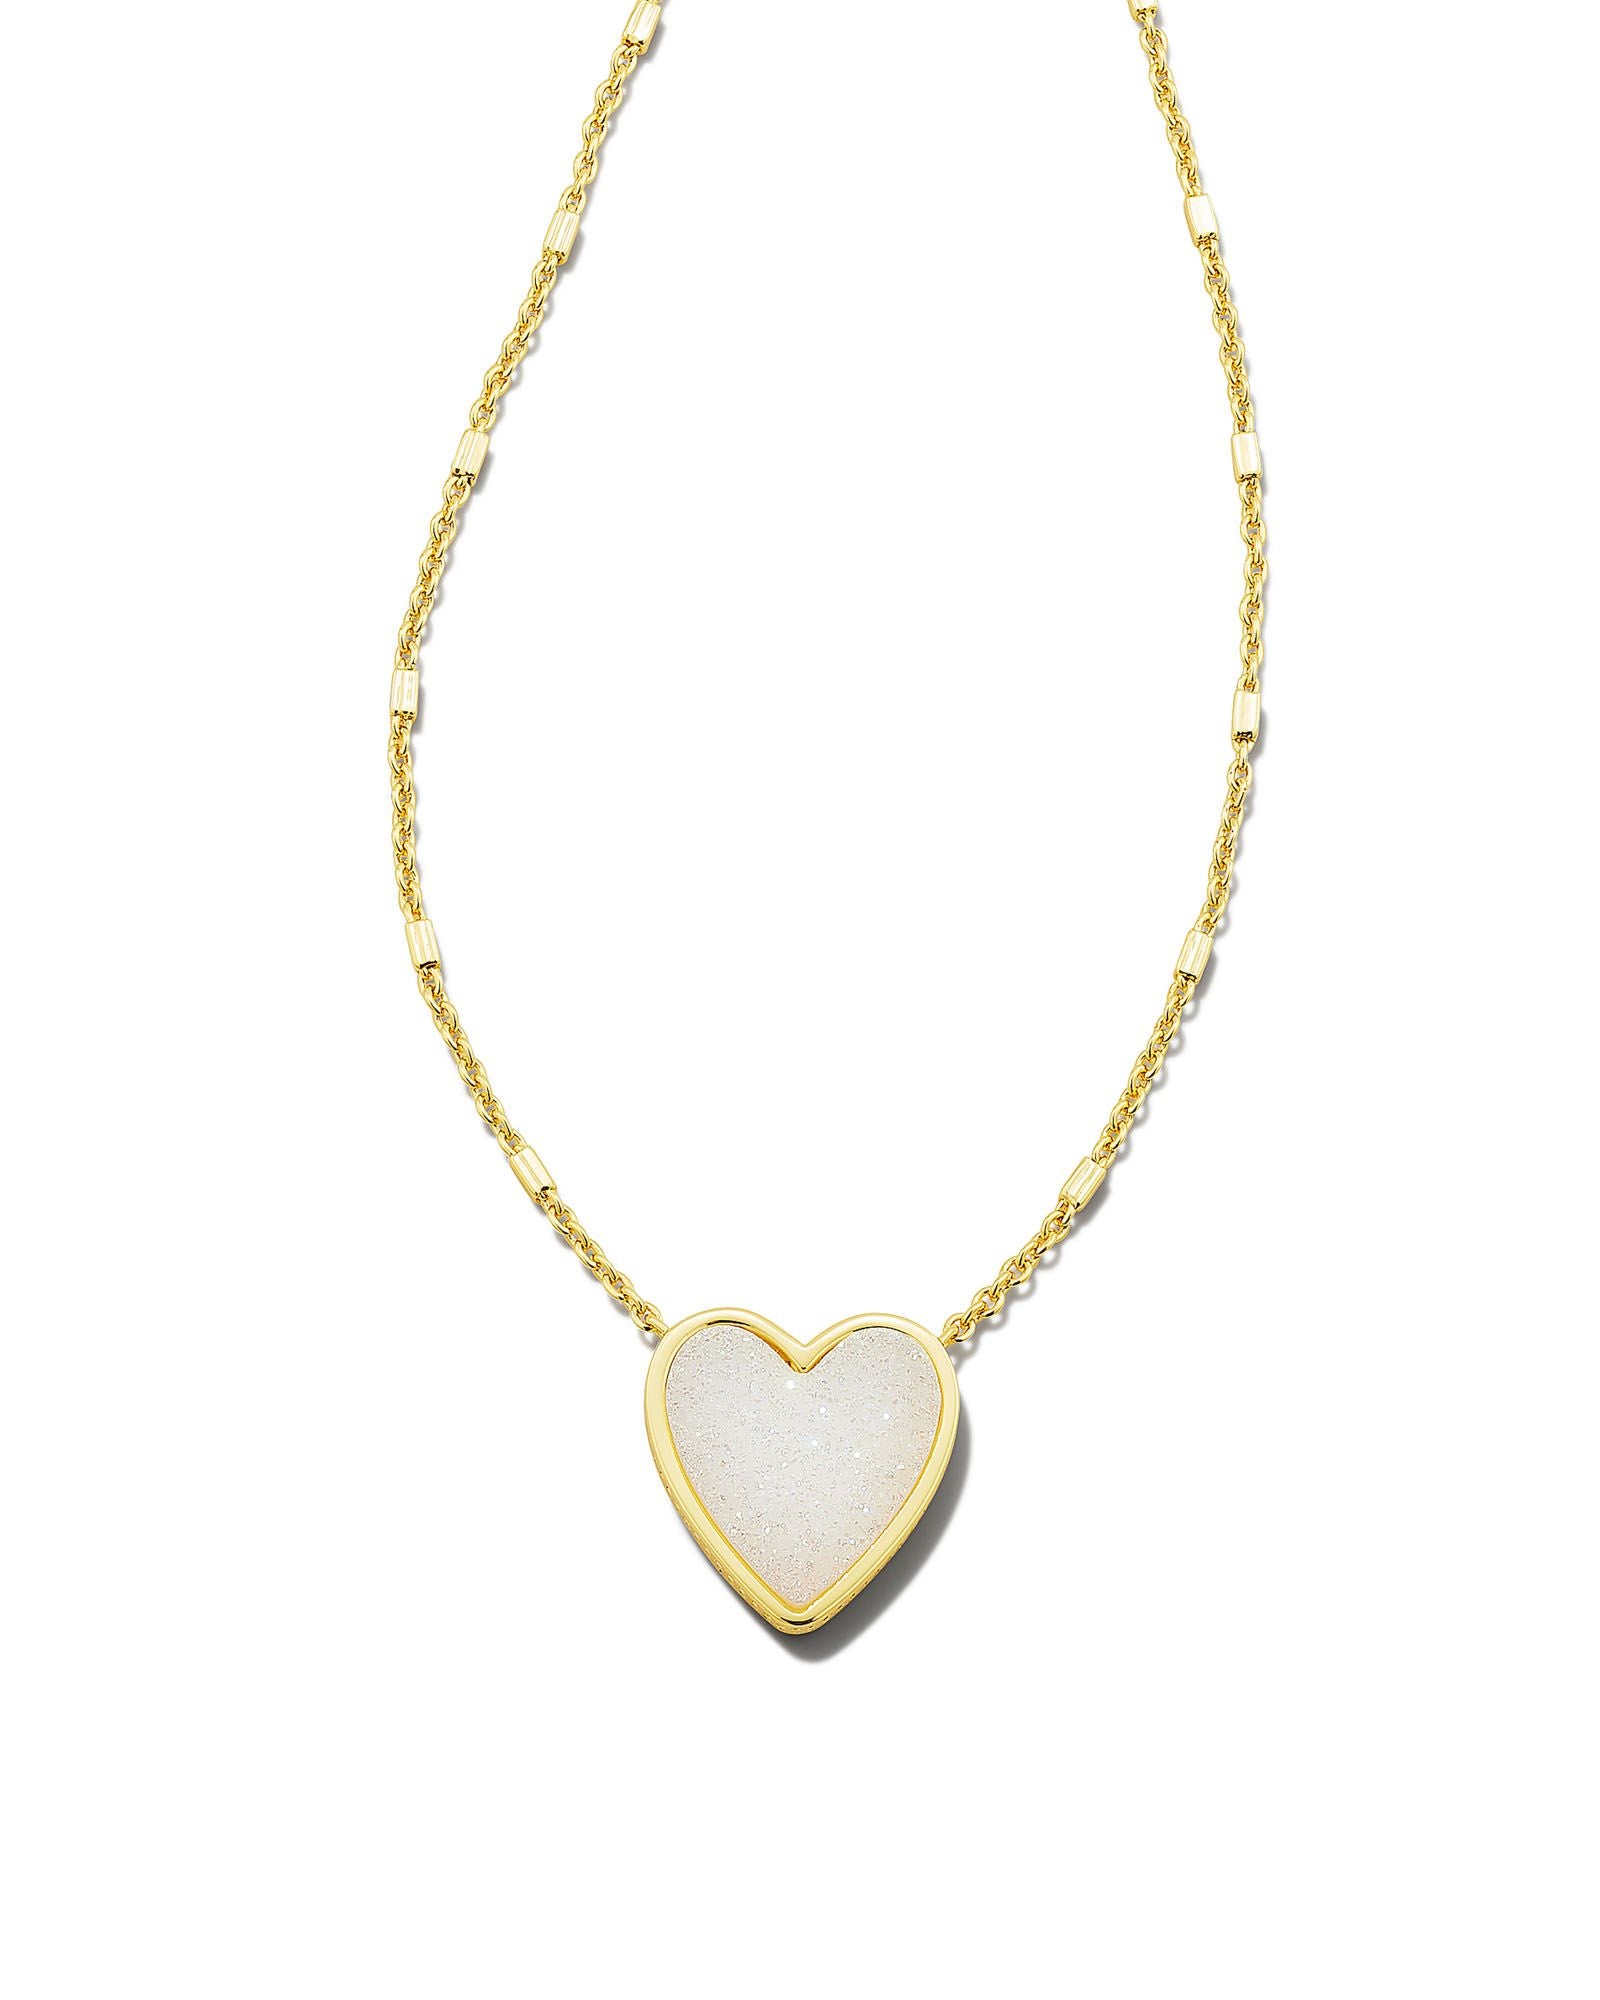 Thatch XOXO Necklace | The Summit at Fritz Farm